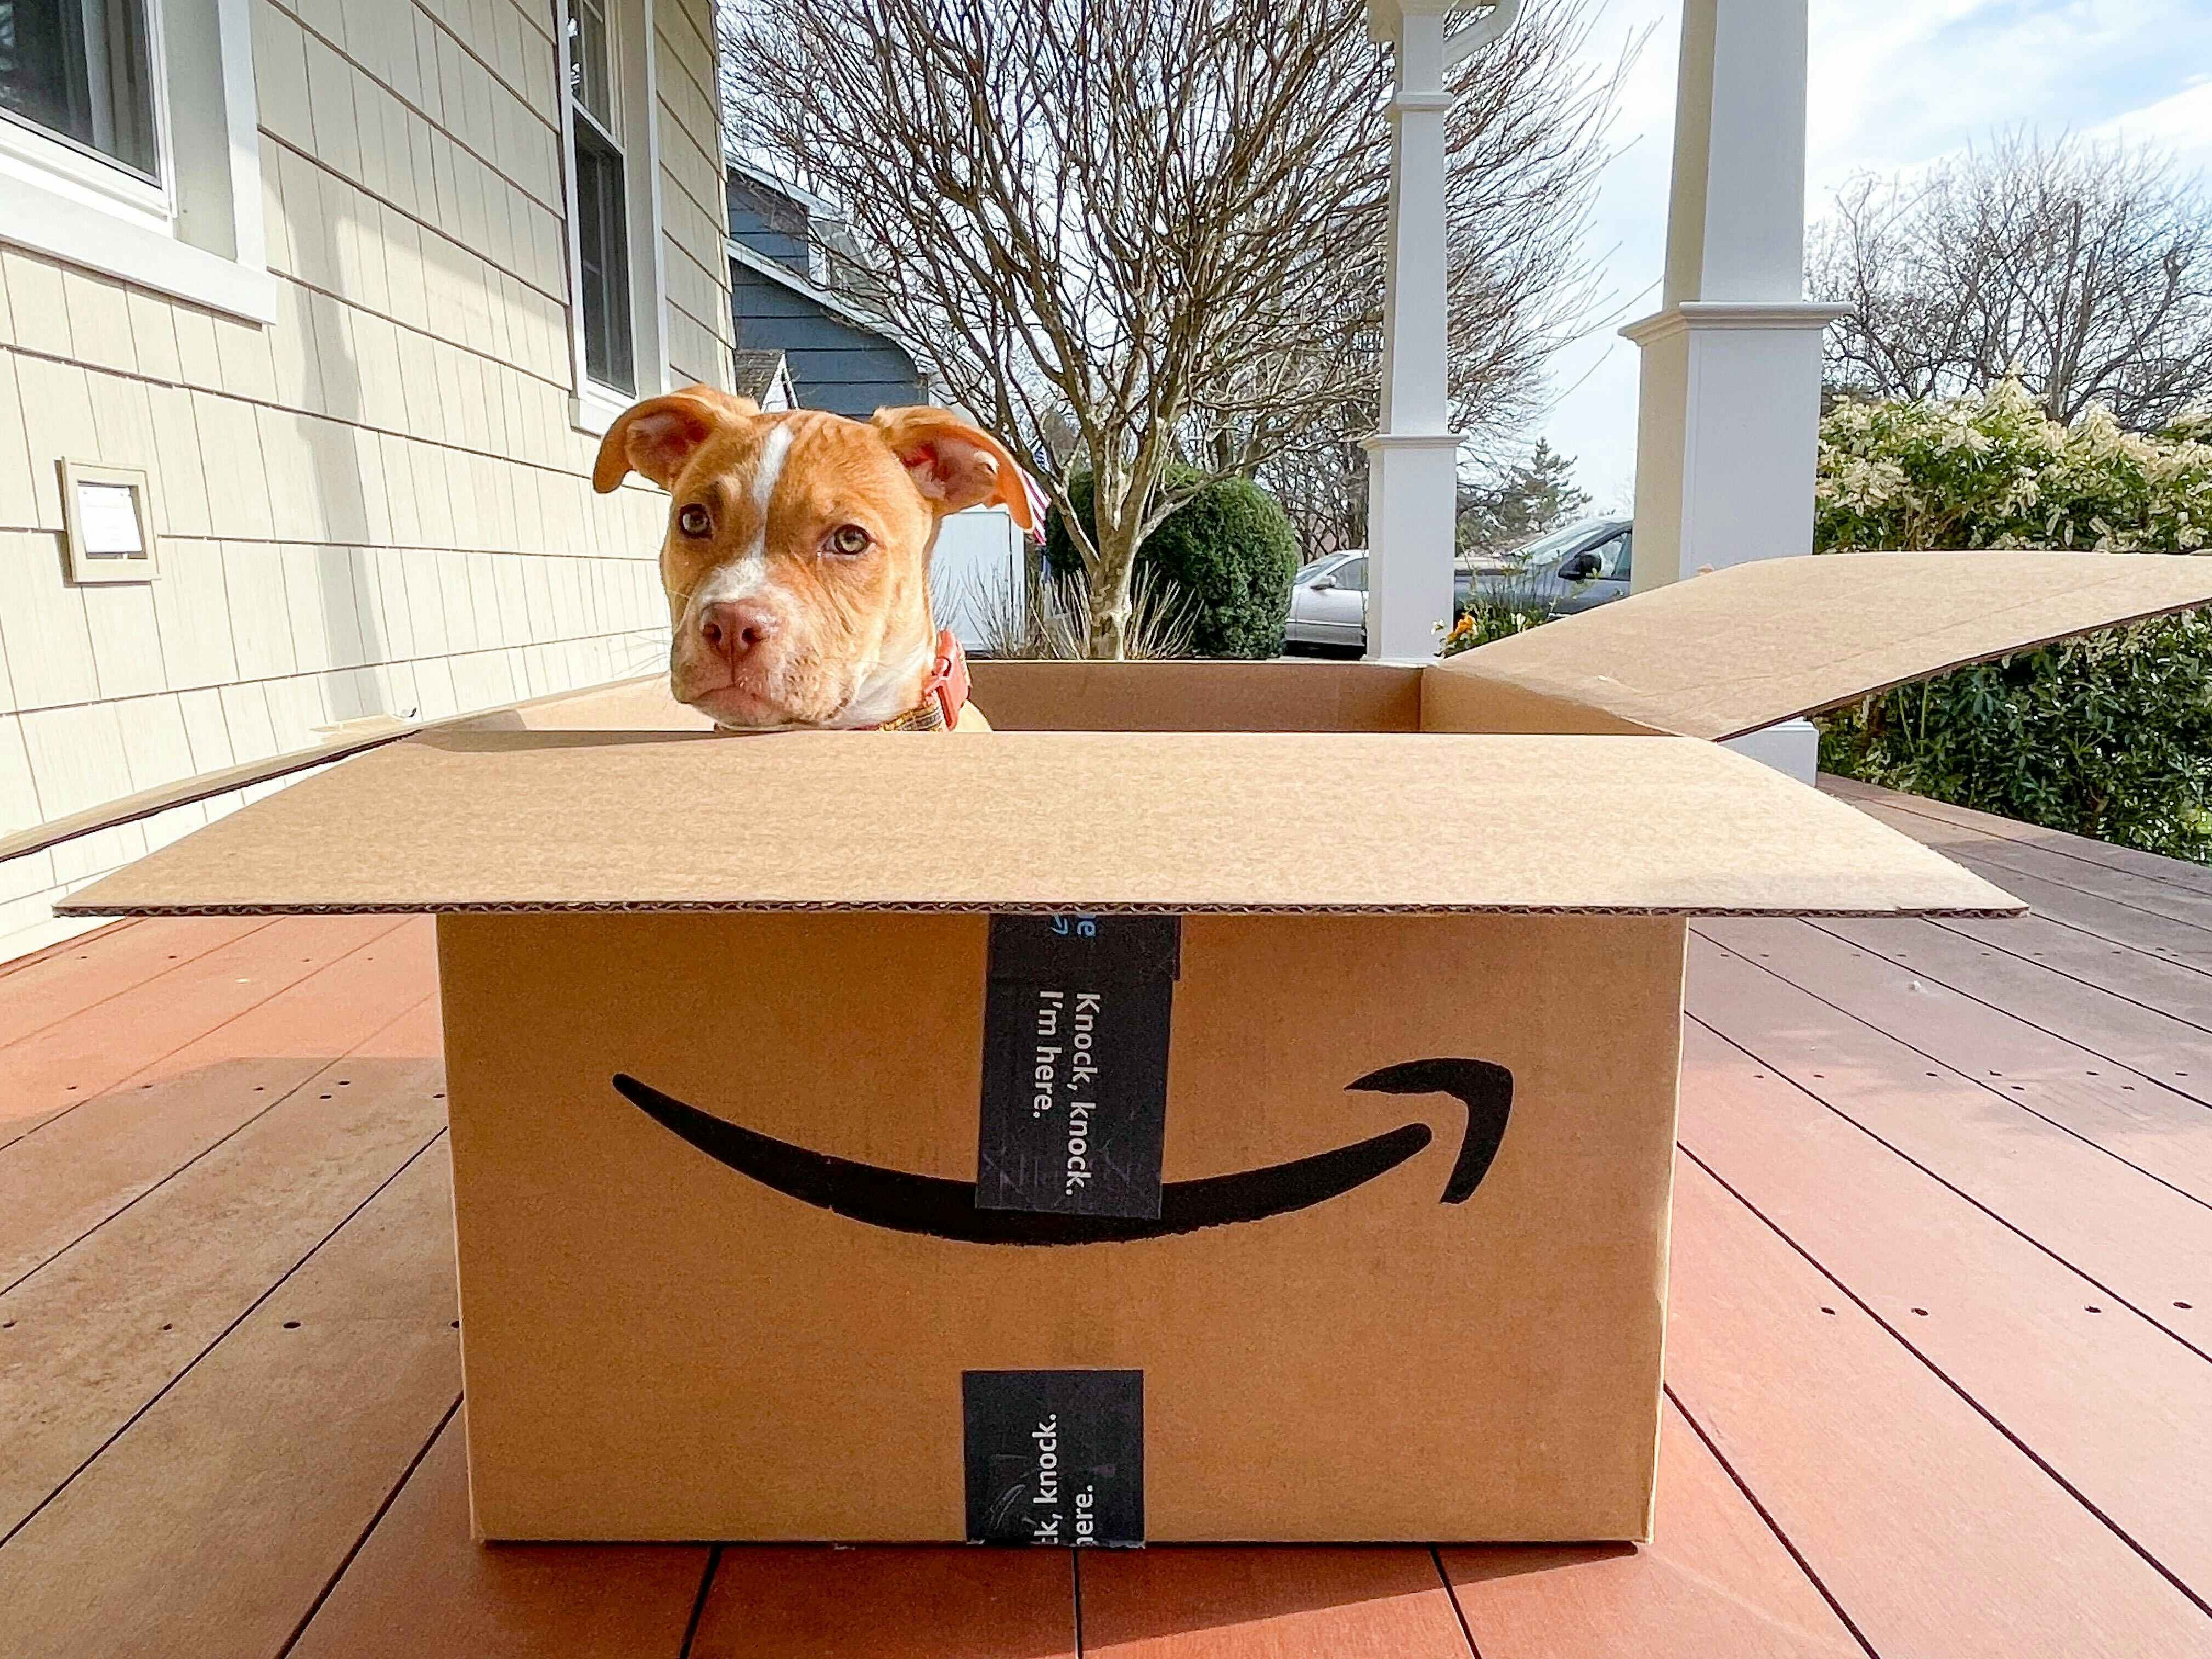 A light colored puppy in an open Amazon box sitting on a front porch.